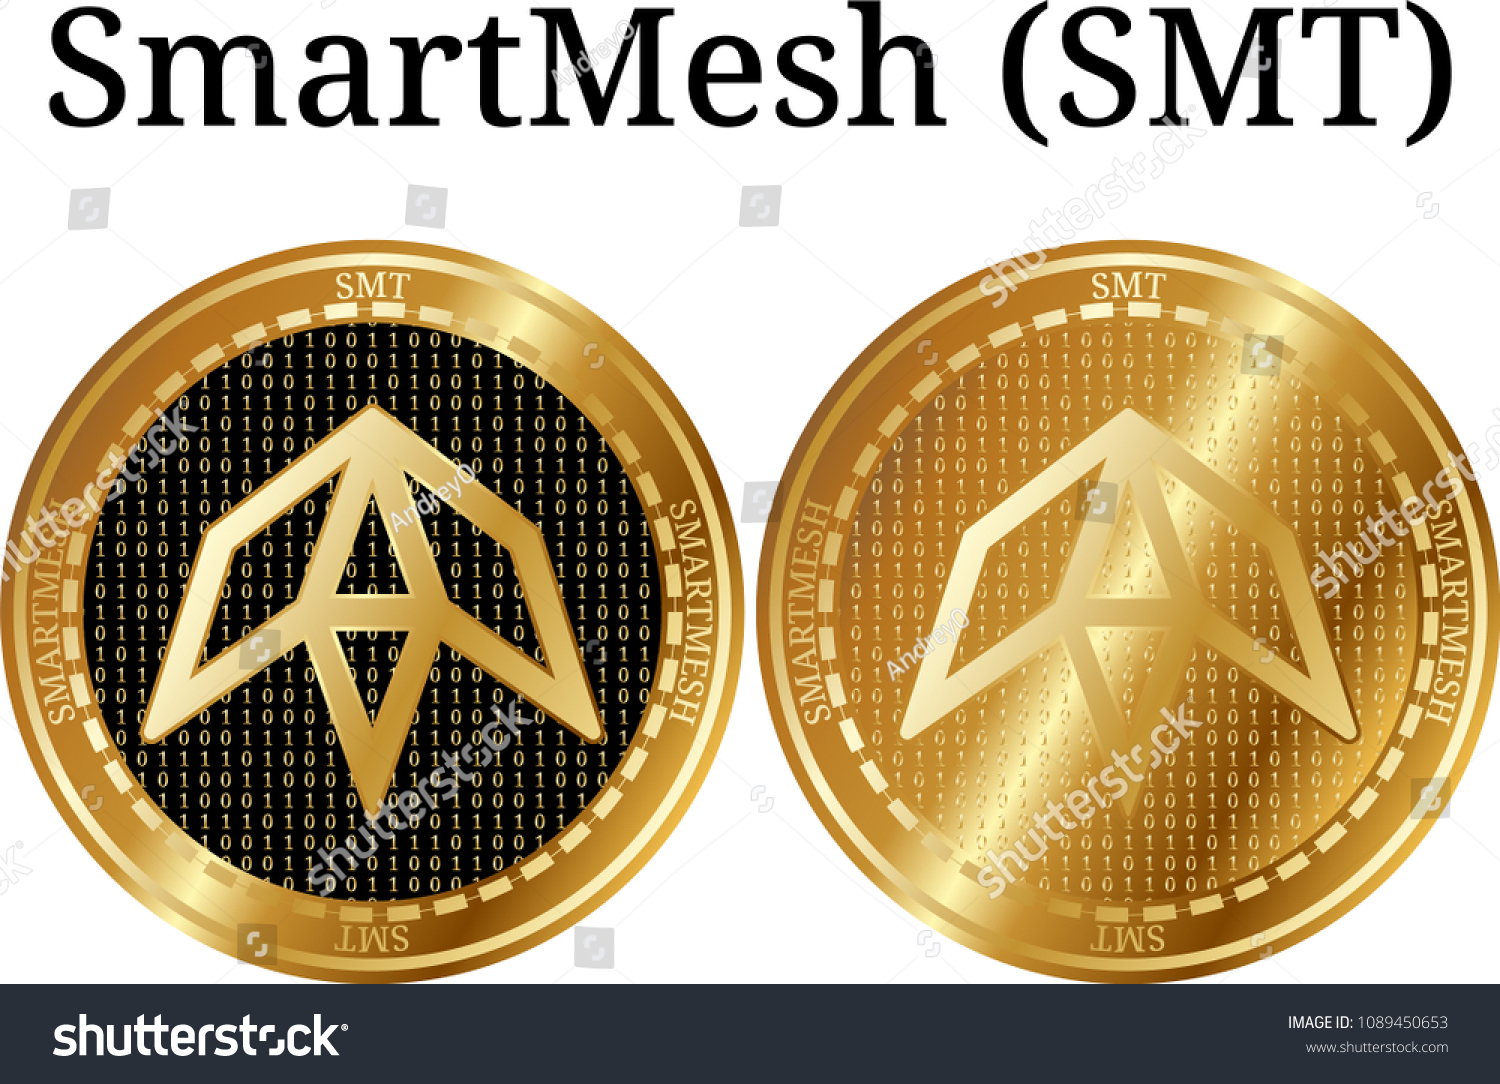 smartmesh cryptocurrency